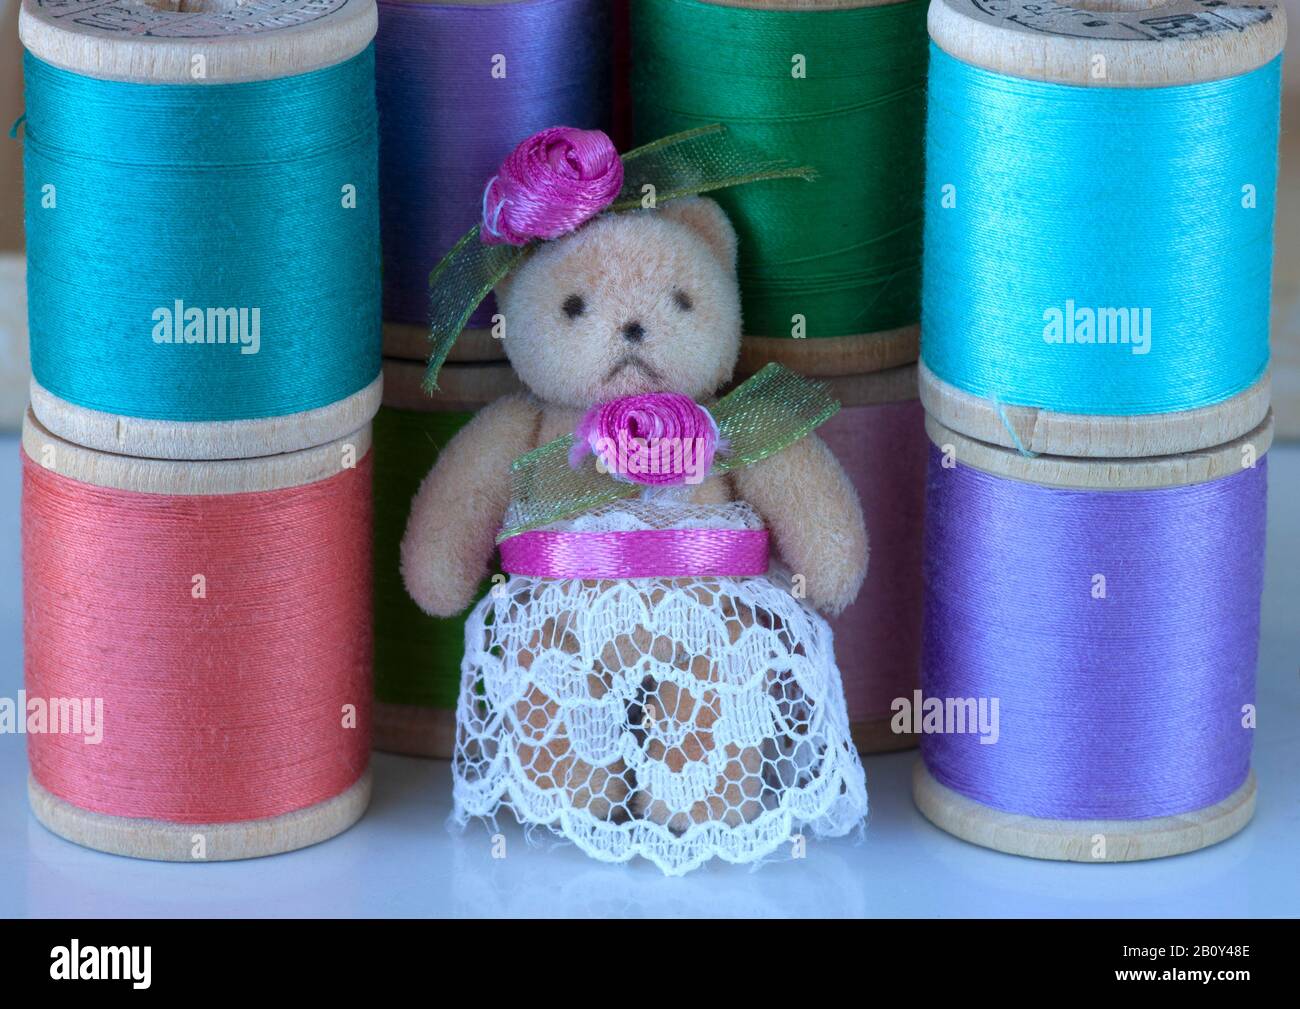 Miniature bear in lace and flowers surrounded by spools of pastel colored thread. Stock Photo